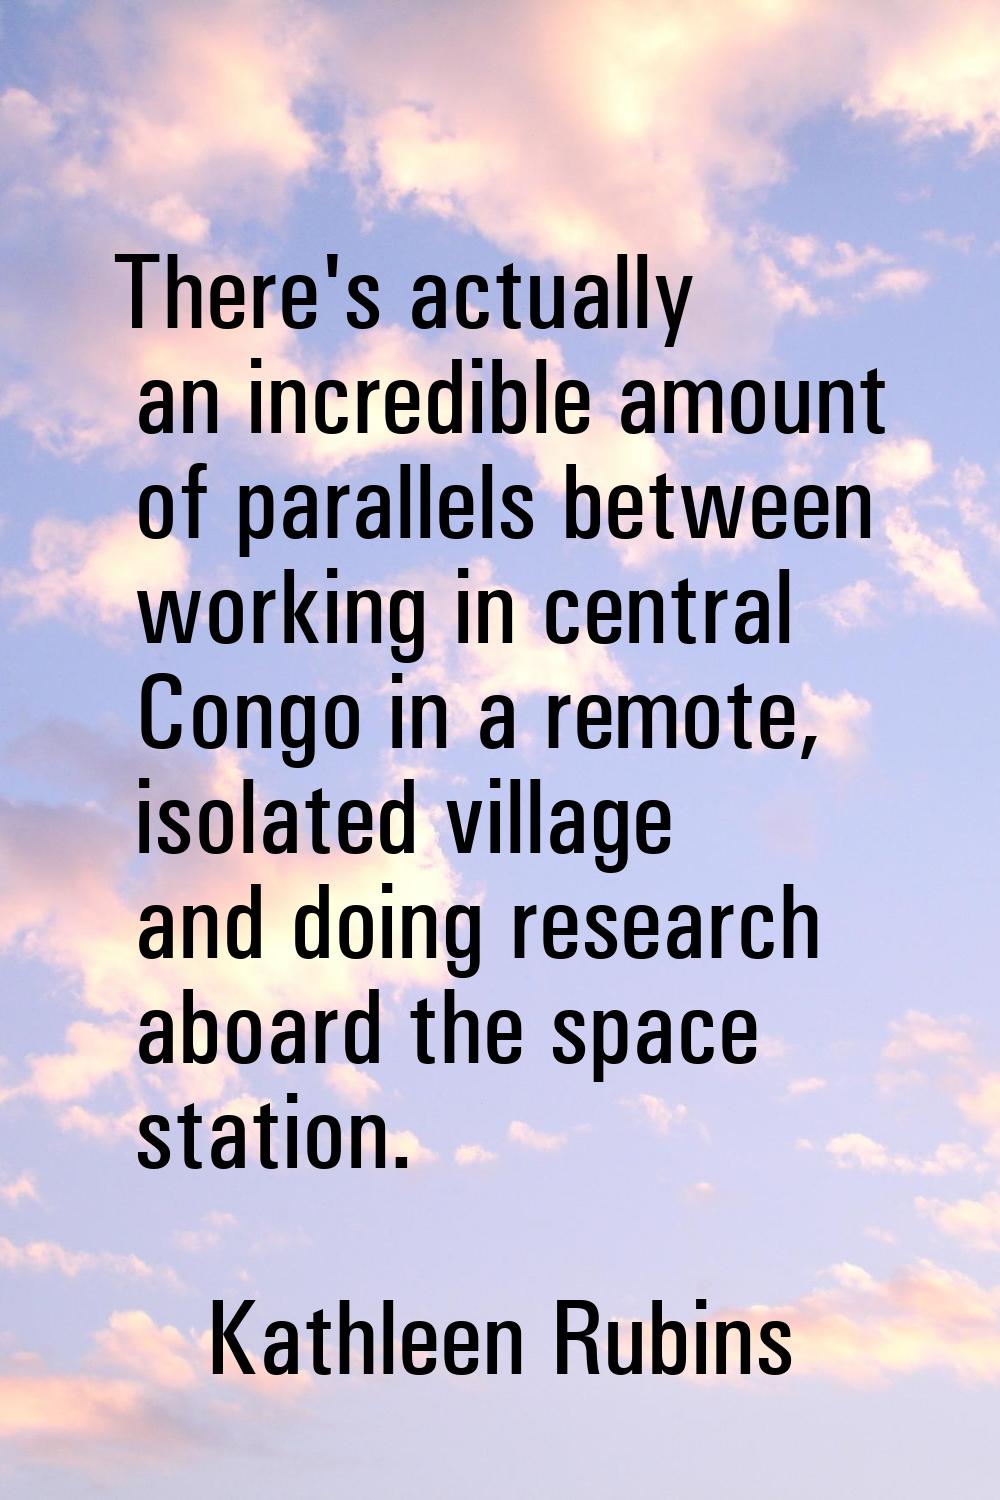 There's actually an incredible amount of parallels between working in central Congo in a remote, is